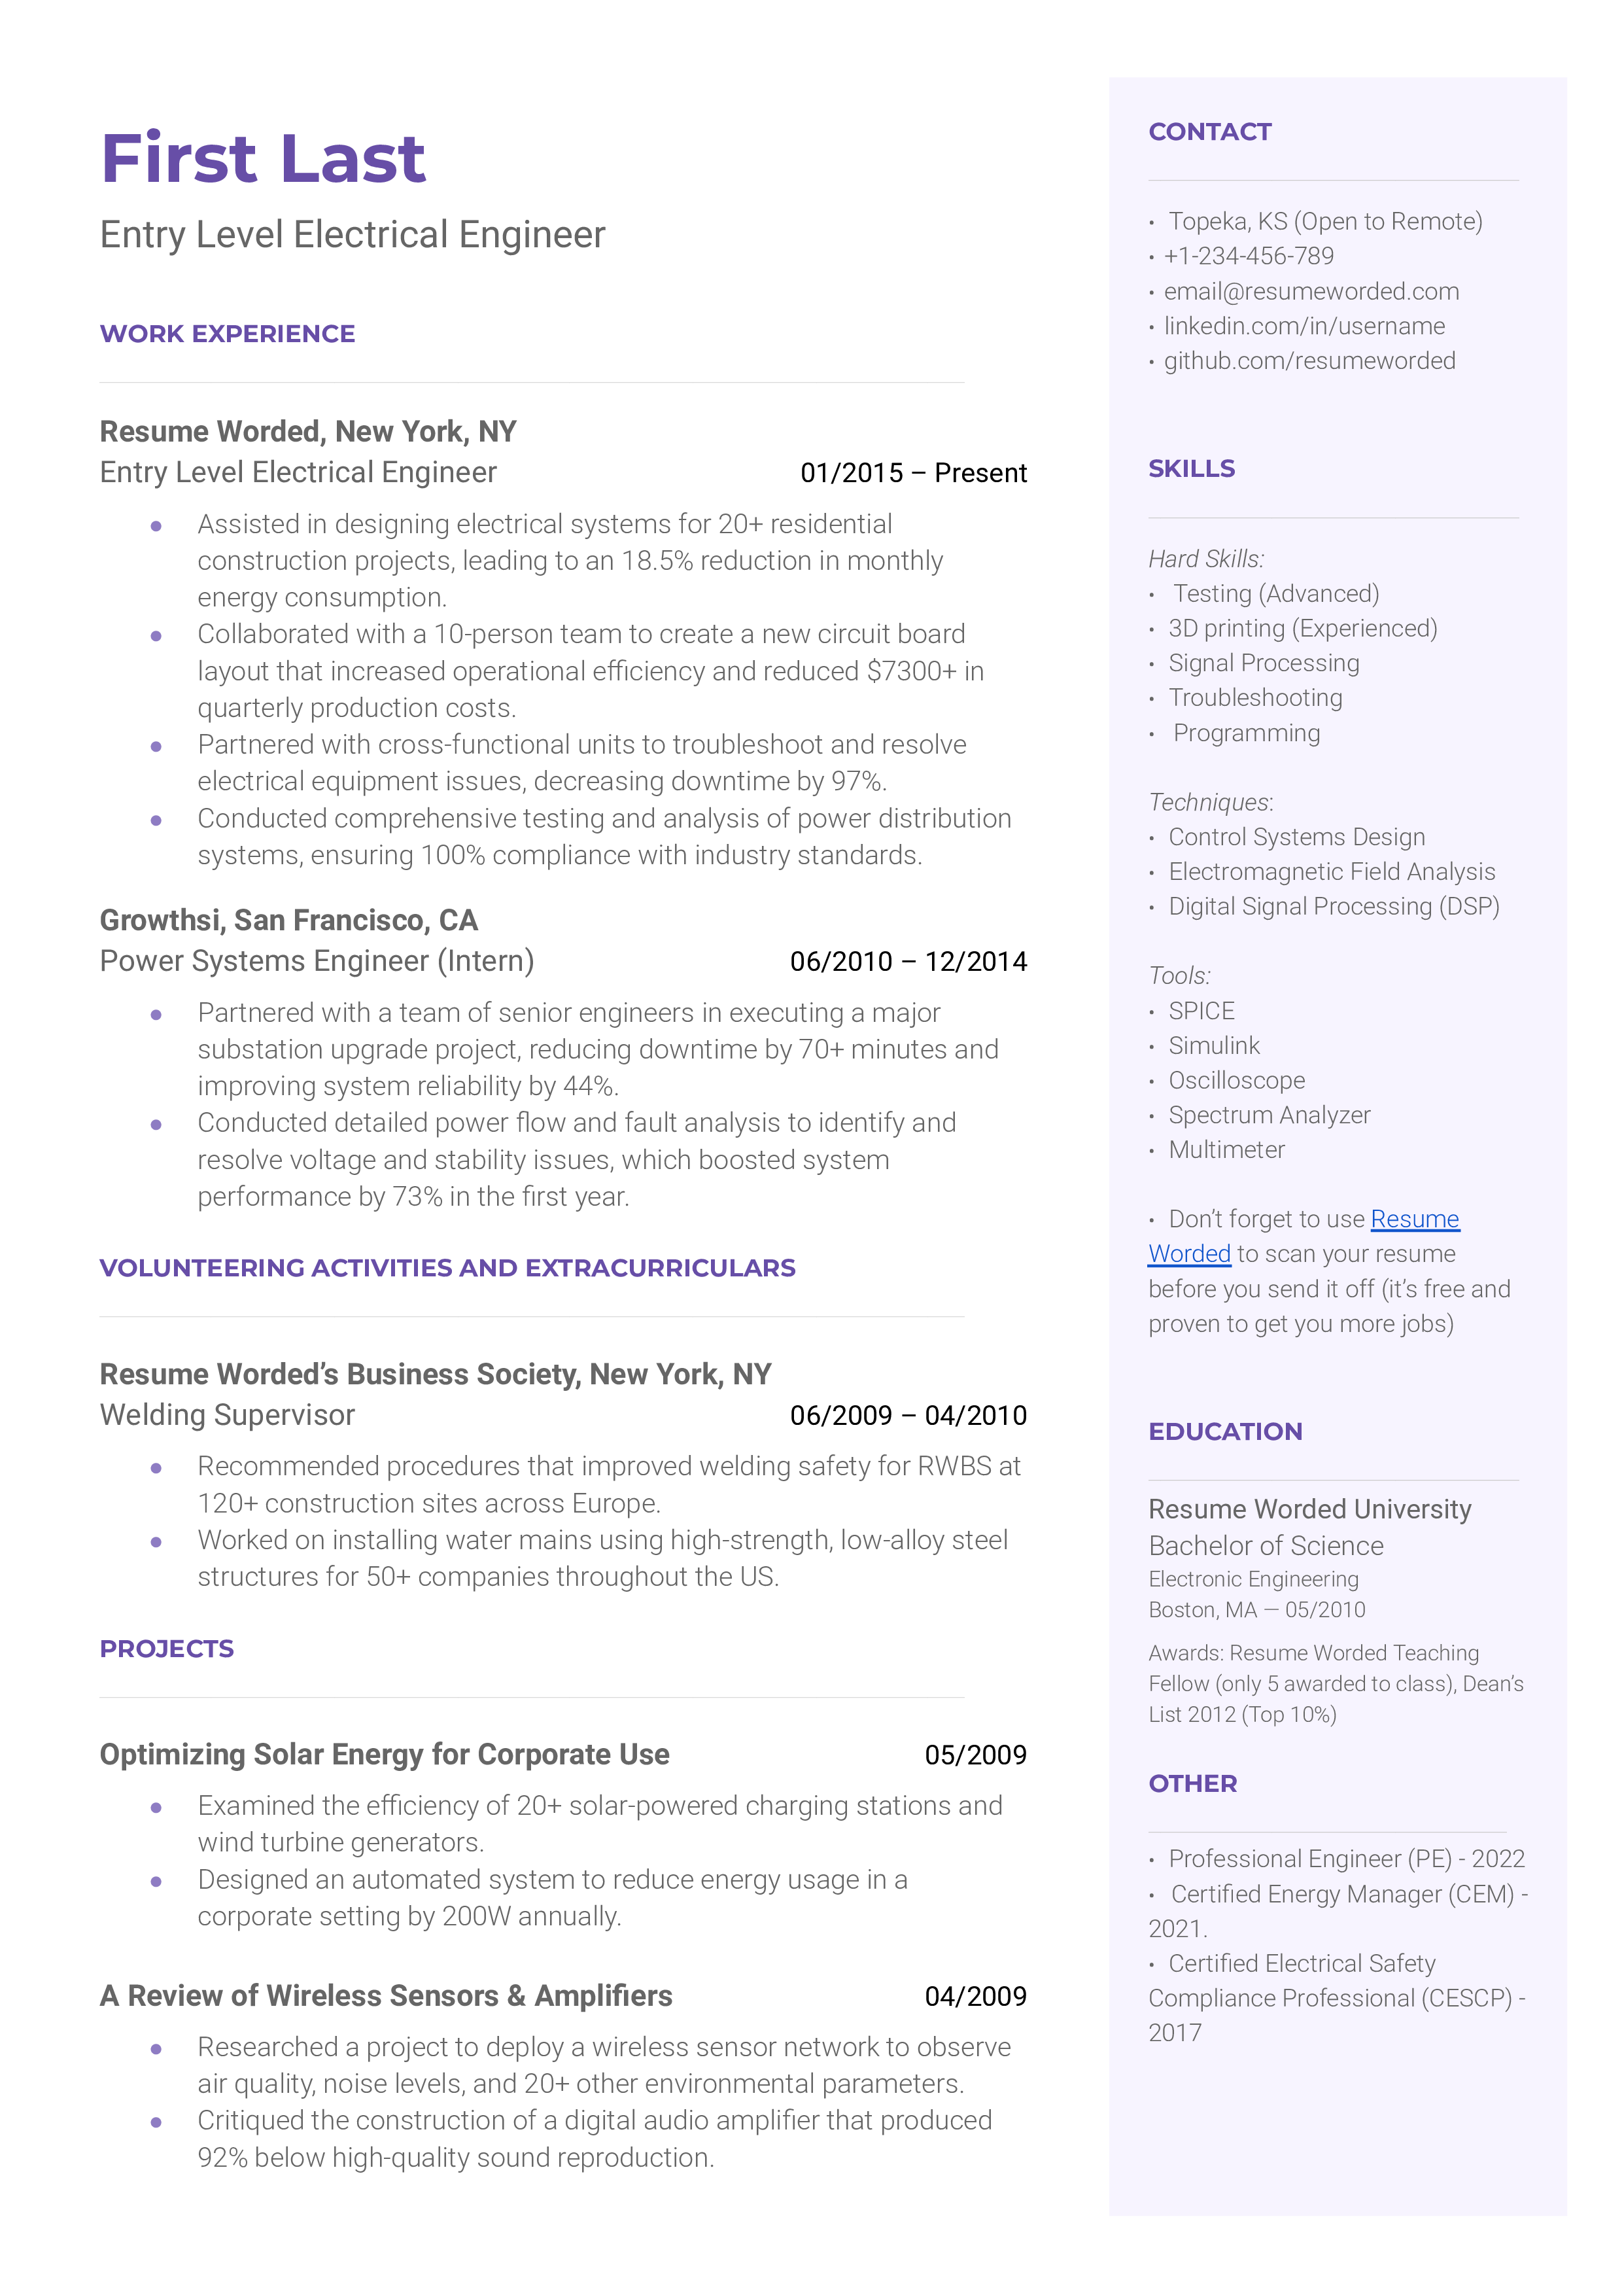 An organized, well-structured CV for an Entry Level Electrical Engineer.